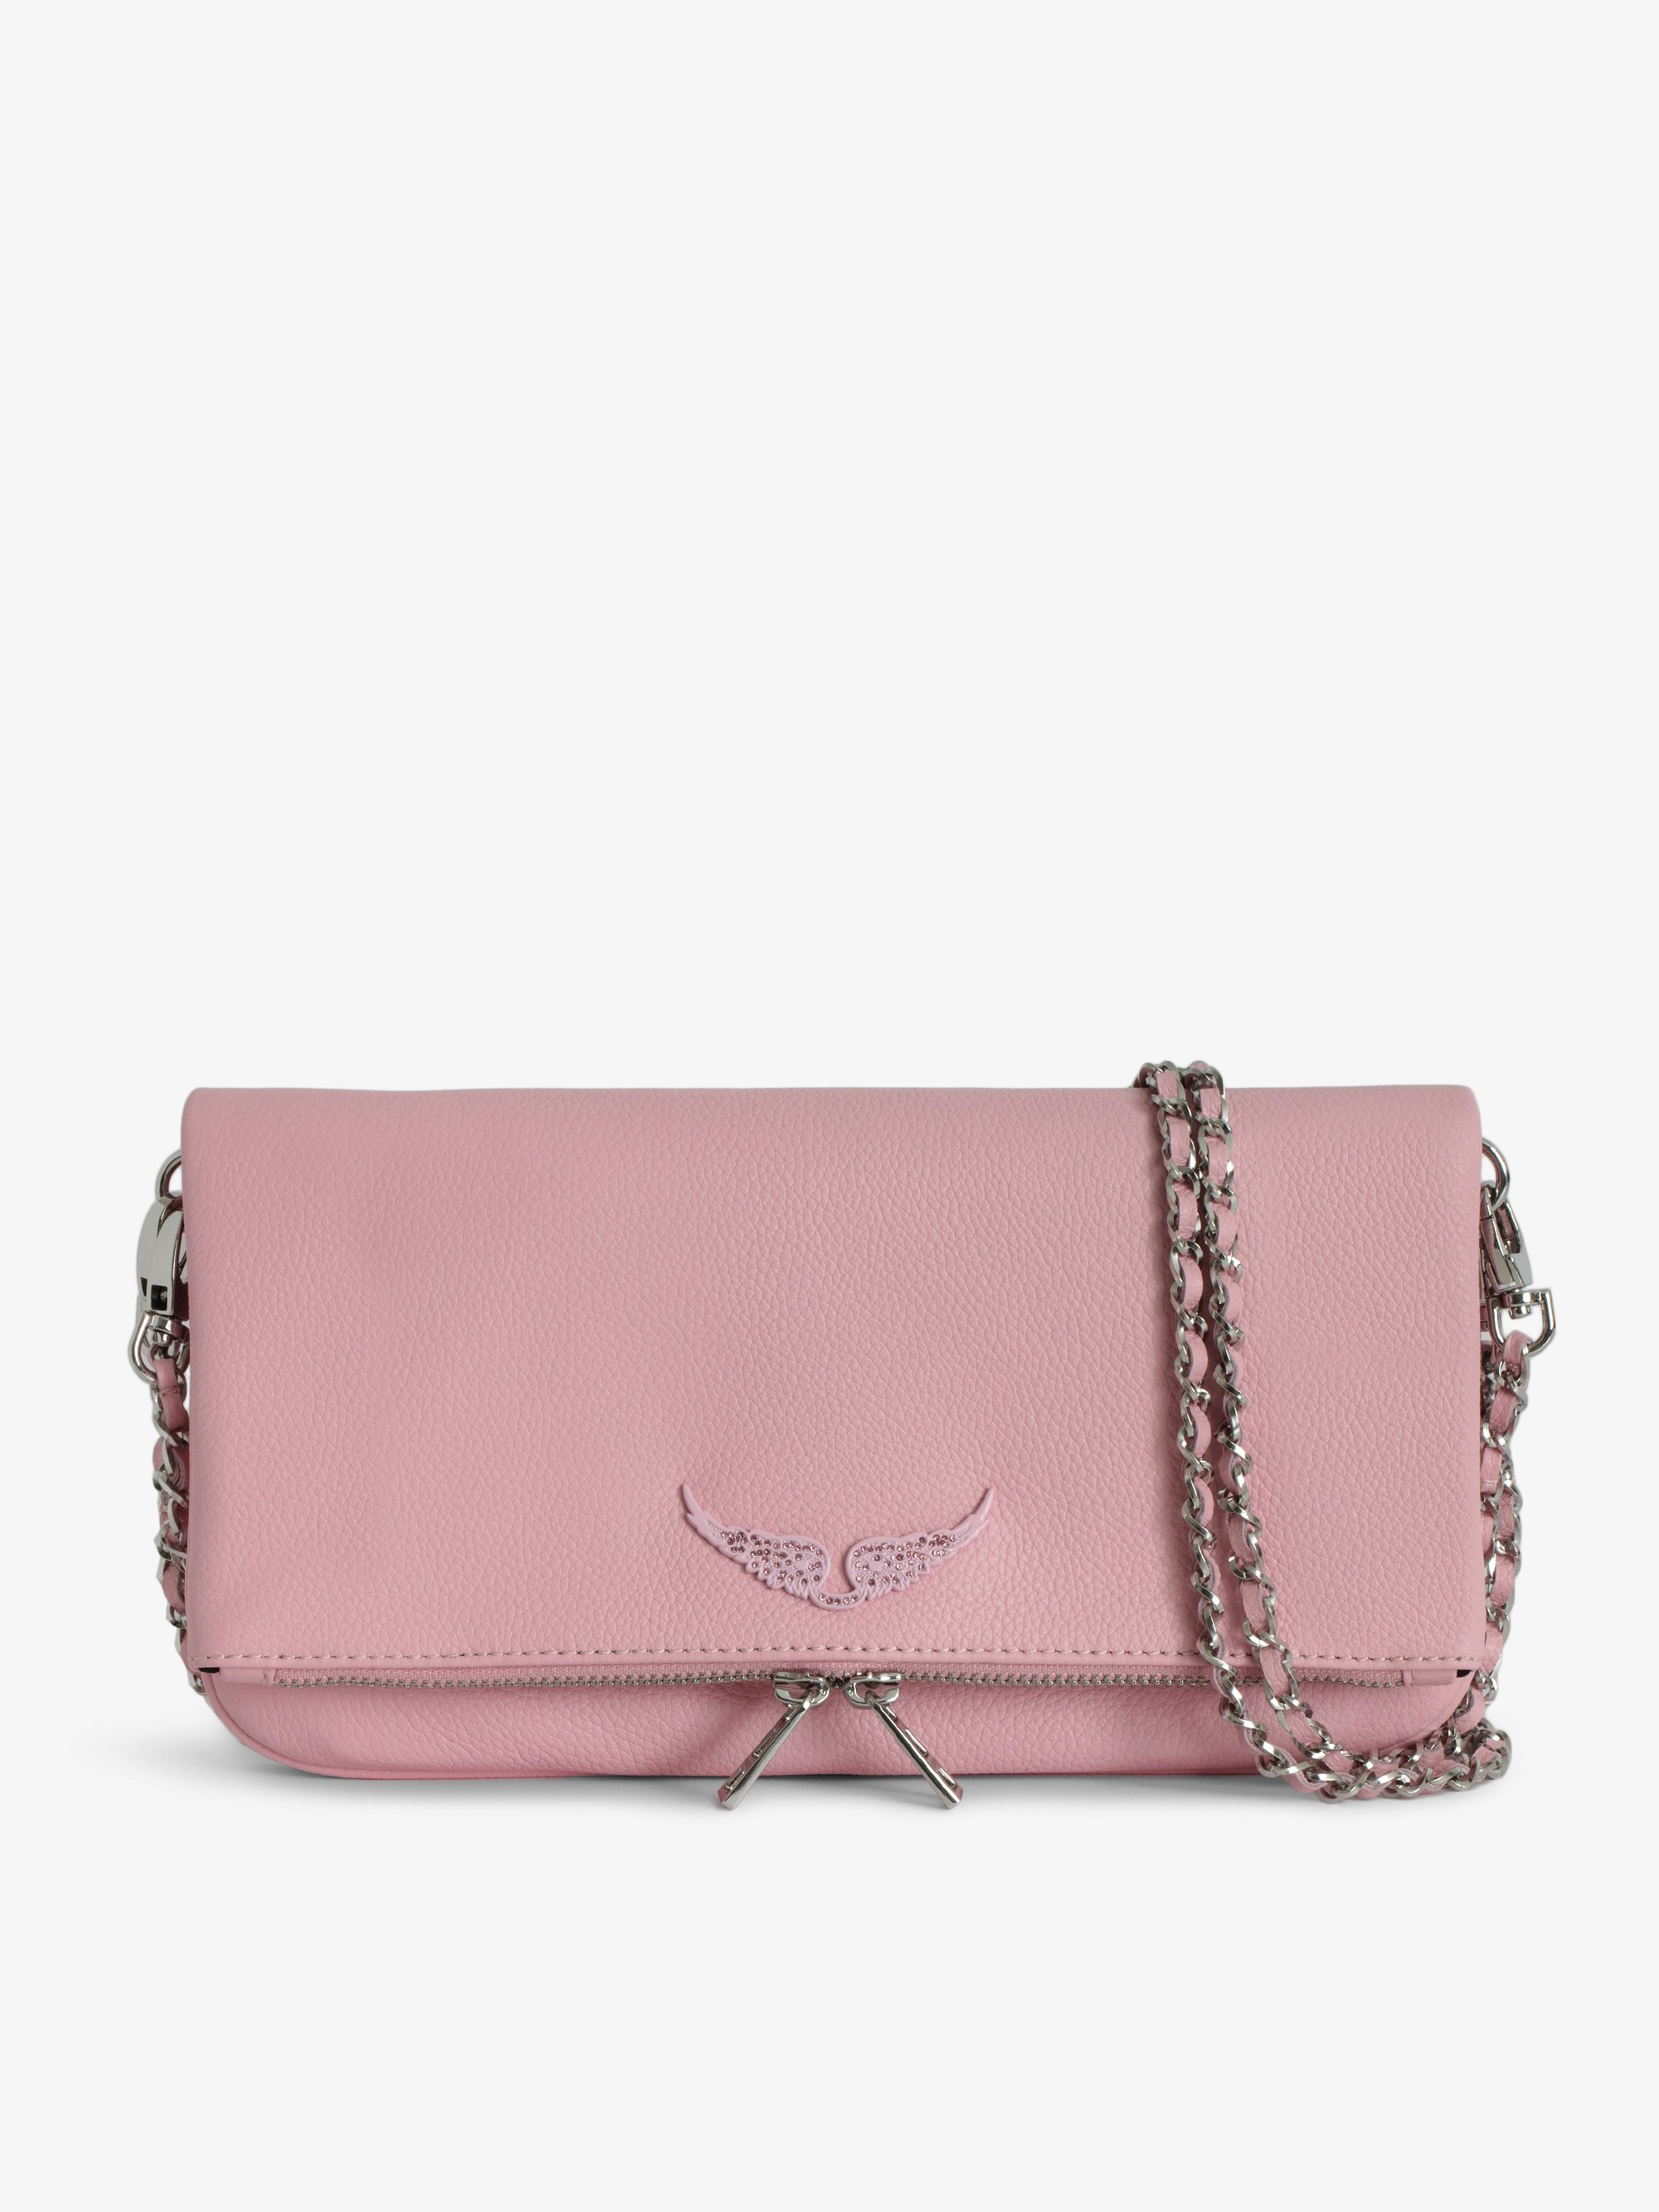 Rock Clutch - Grained leather clutch with double chain and signature wings.